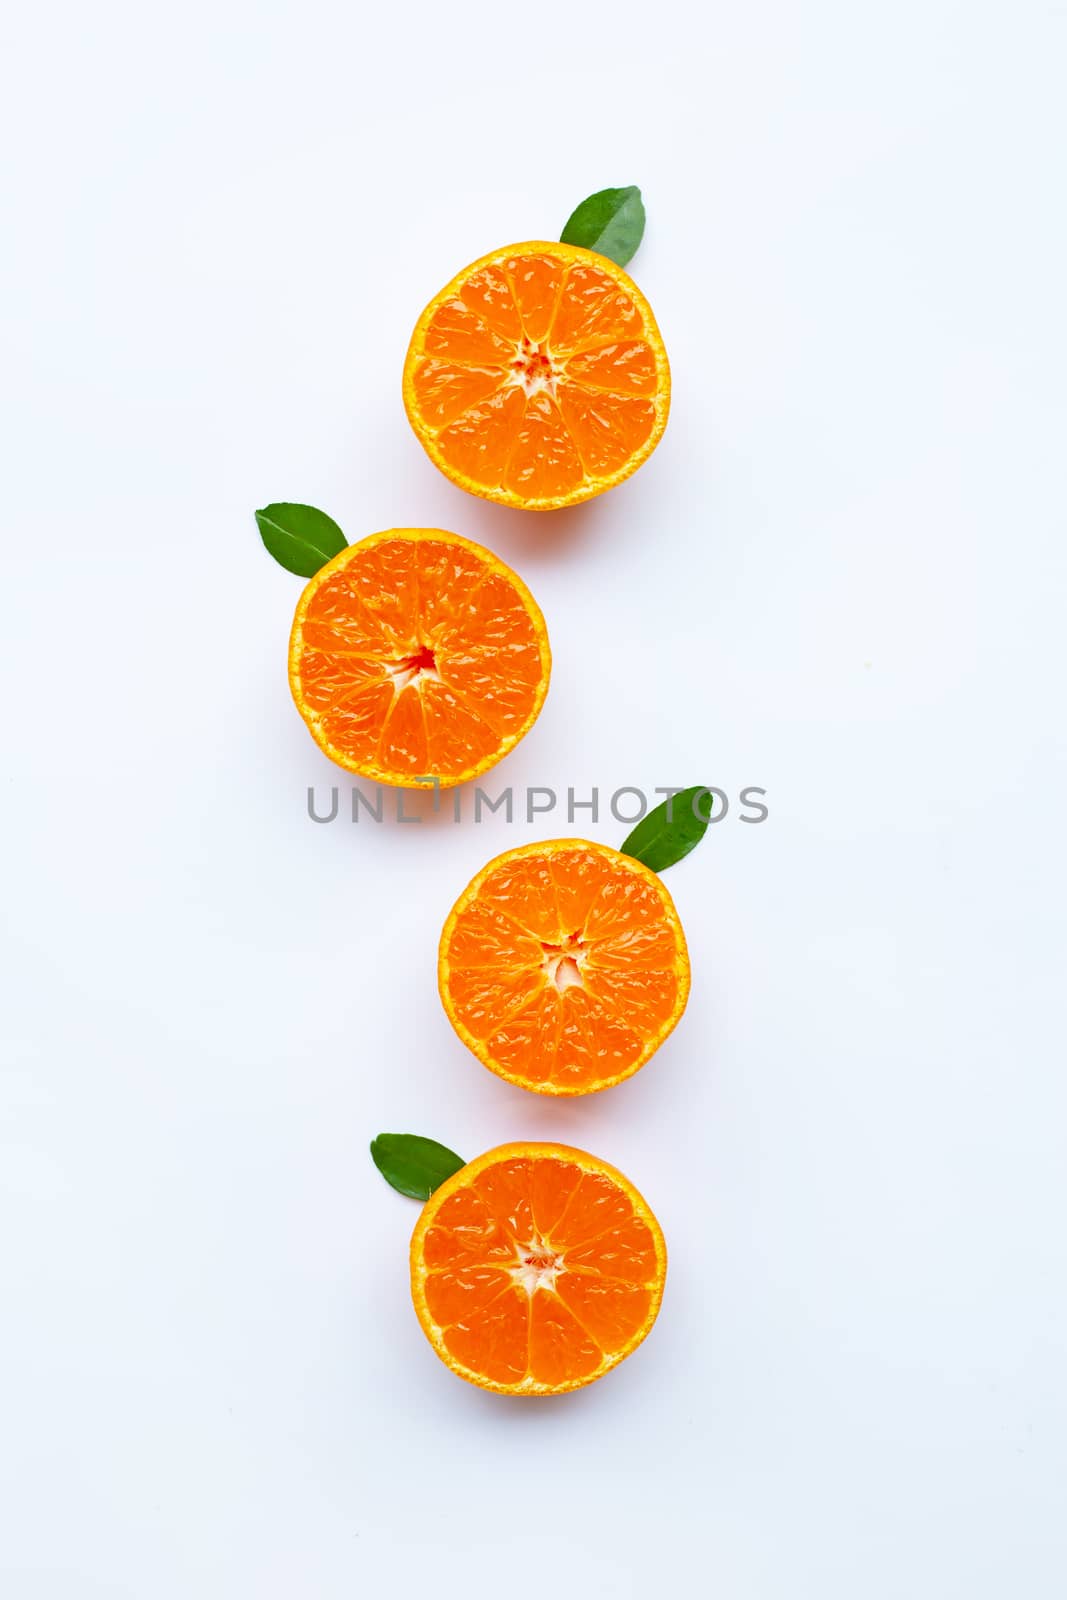 Orange fruits and green leaves on a white background.  by Bowonpat